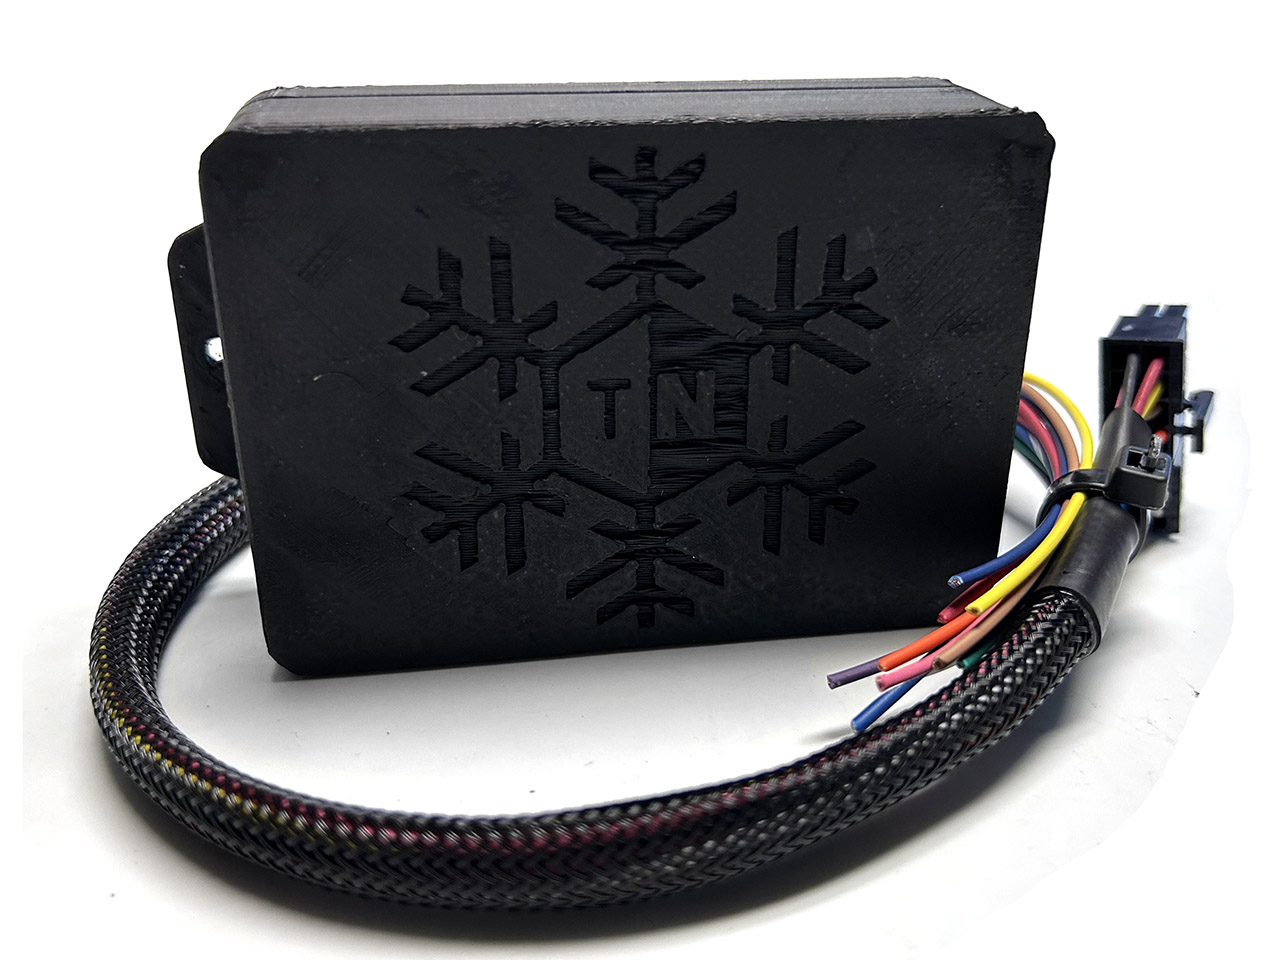 FrostByte is a fully mappable water/methanol injection controller